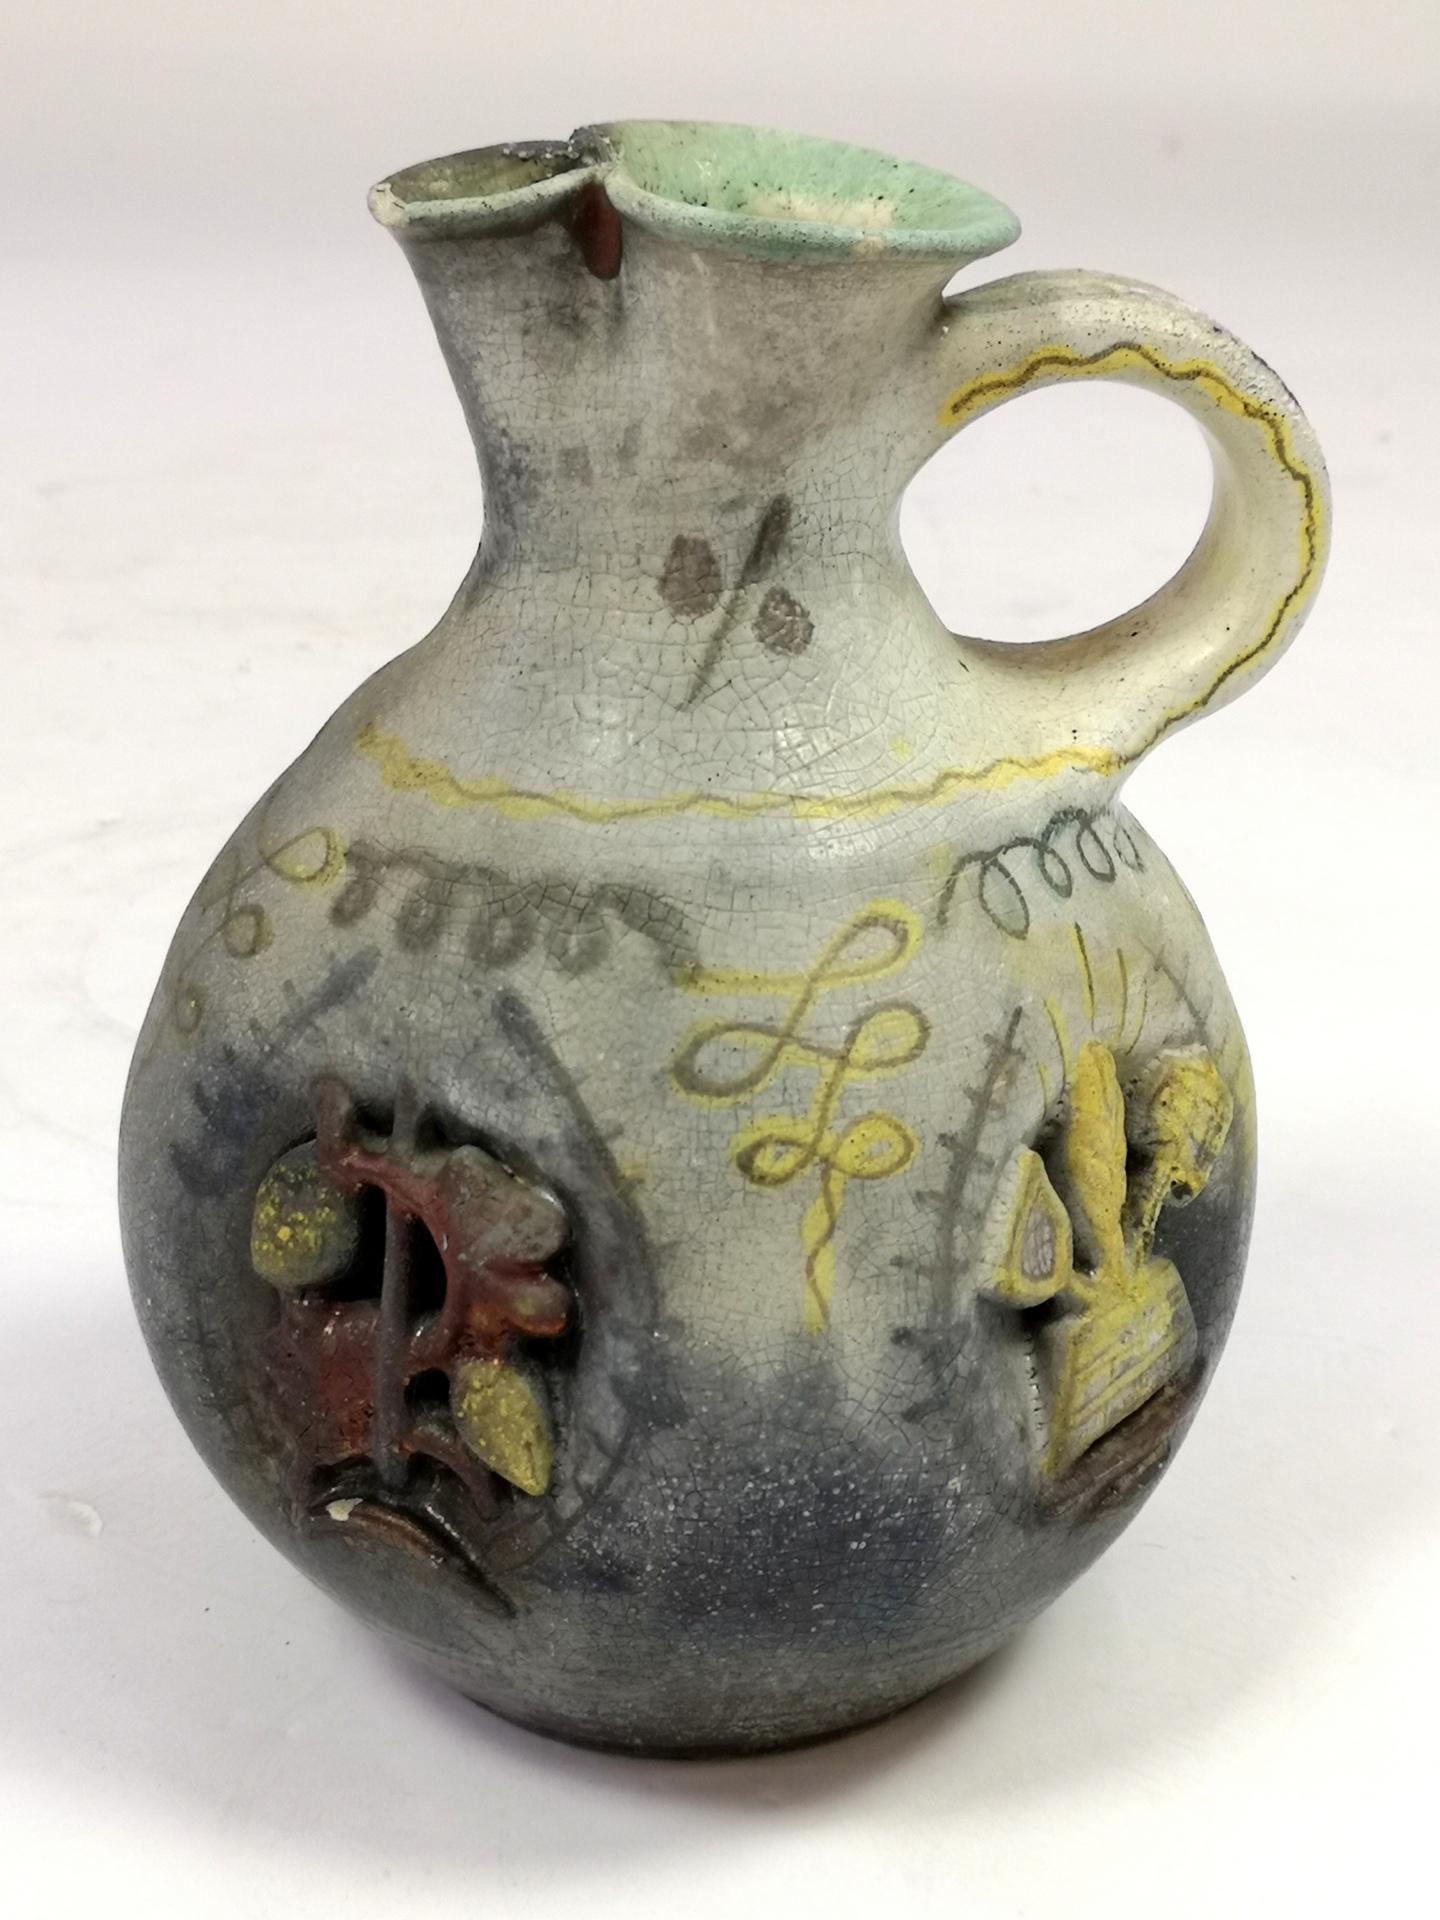 This rare ceramic beer pitcher was made by famous ceramicist Geza Gorka, for Dreher, hungarian beer factory, in the 1930's. It's decorated all around with beer making accessories, malt, barley, keg, etc, and a Hungarian coat of arms. Some chipping